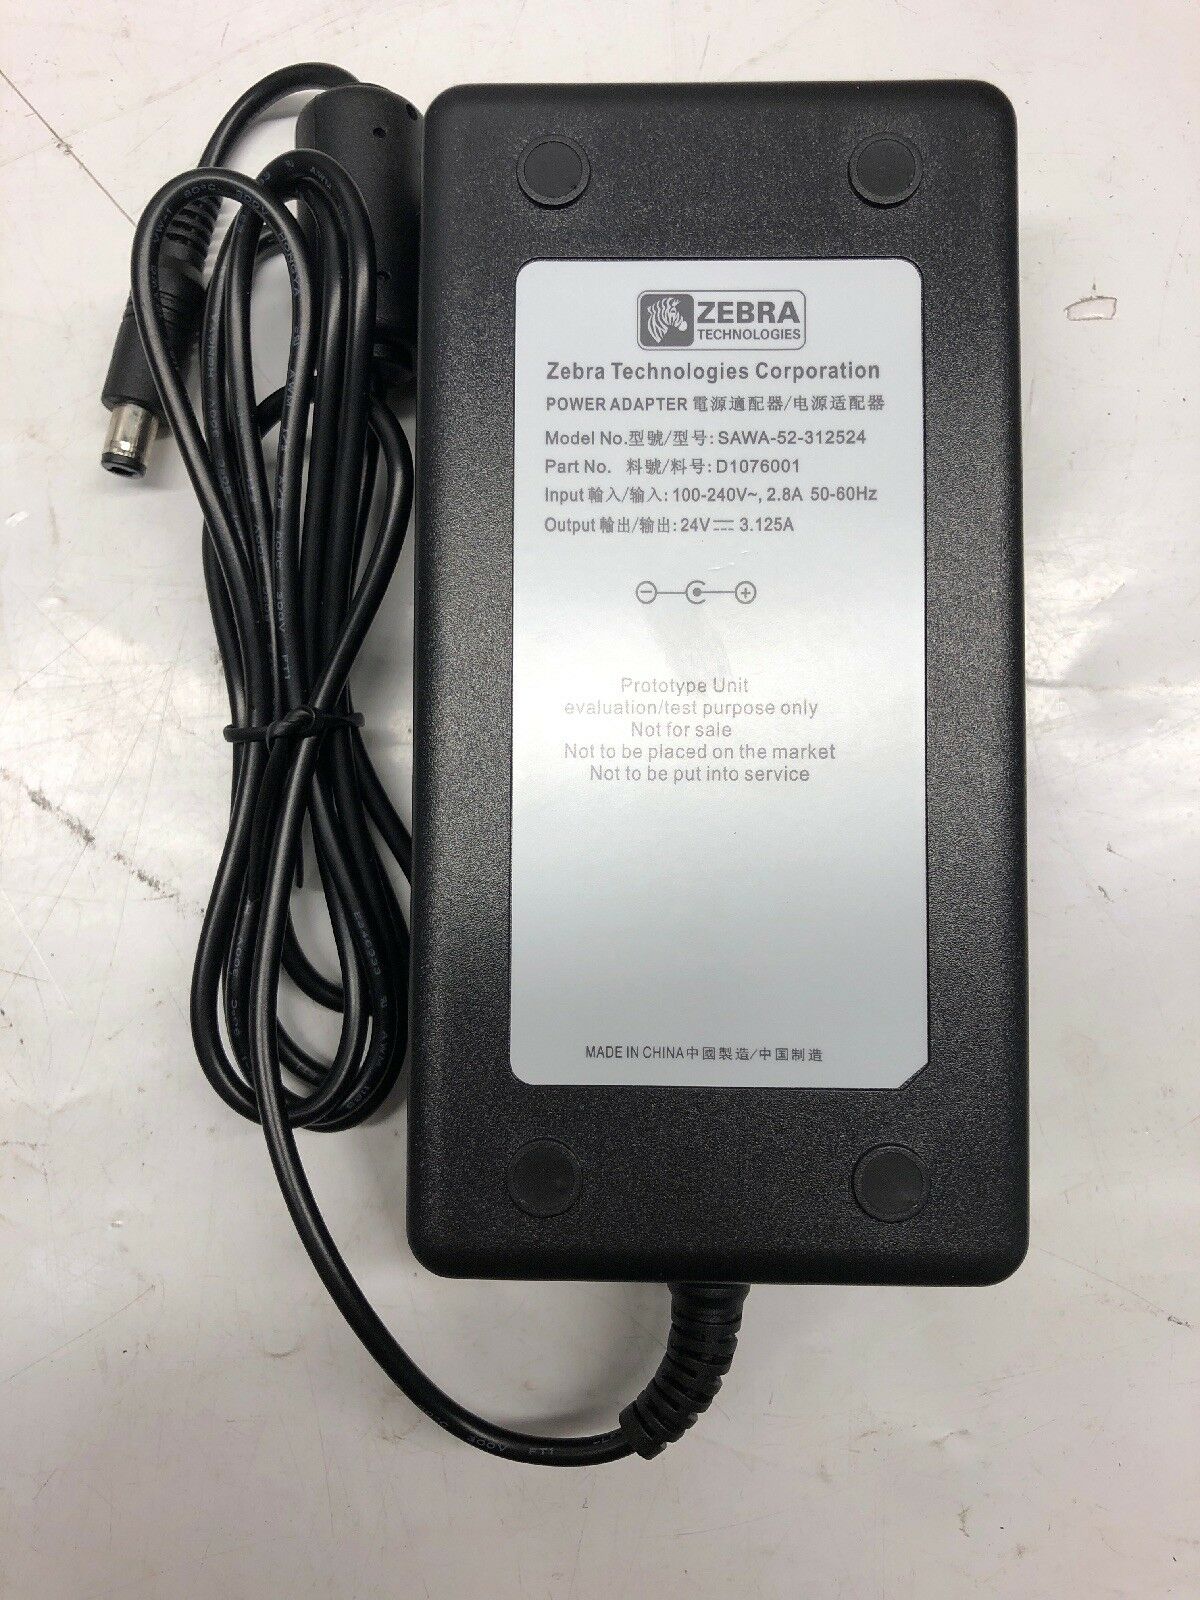 Zebra Thermal Printer Power Supply Adapter SAWA-52-312524 (output 24V-3.125A) Country/Region of Man